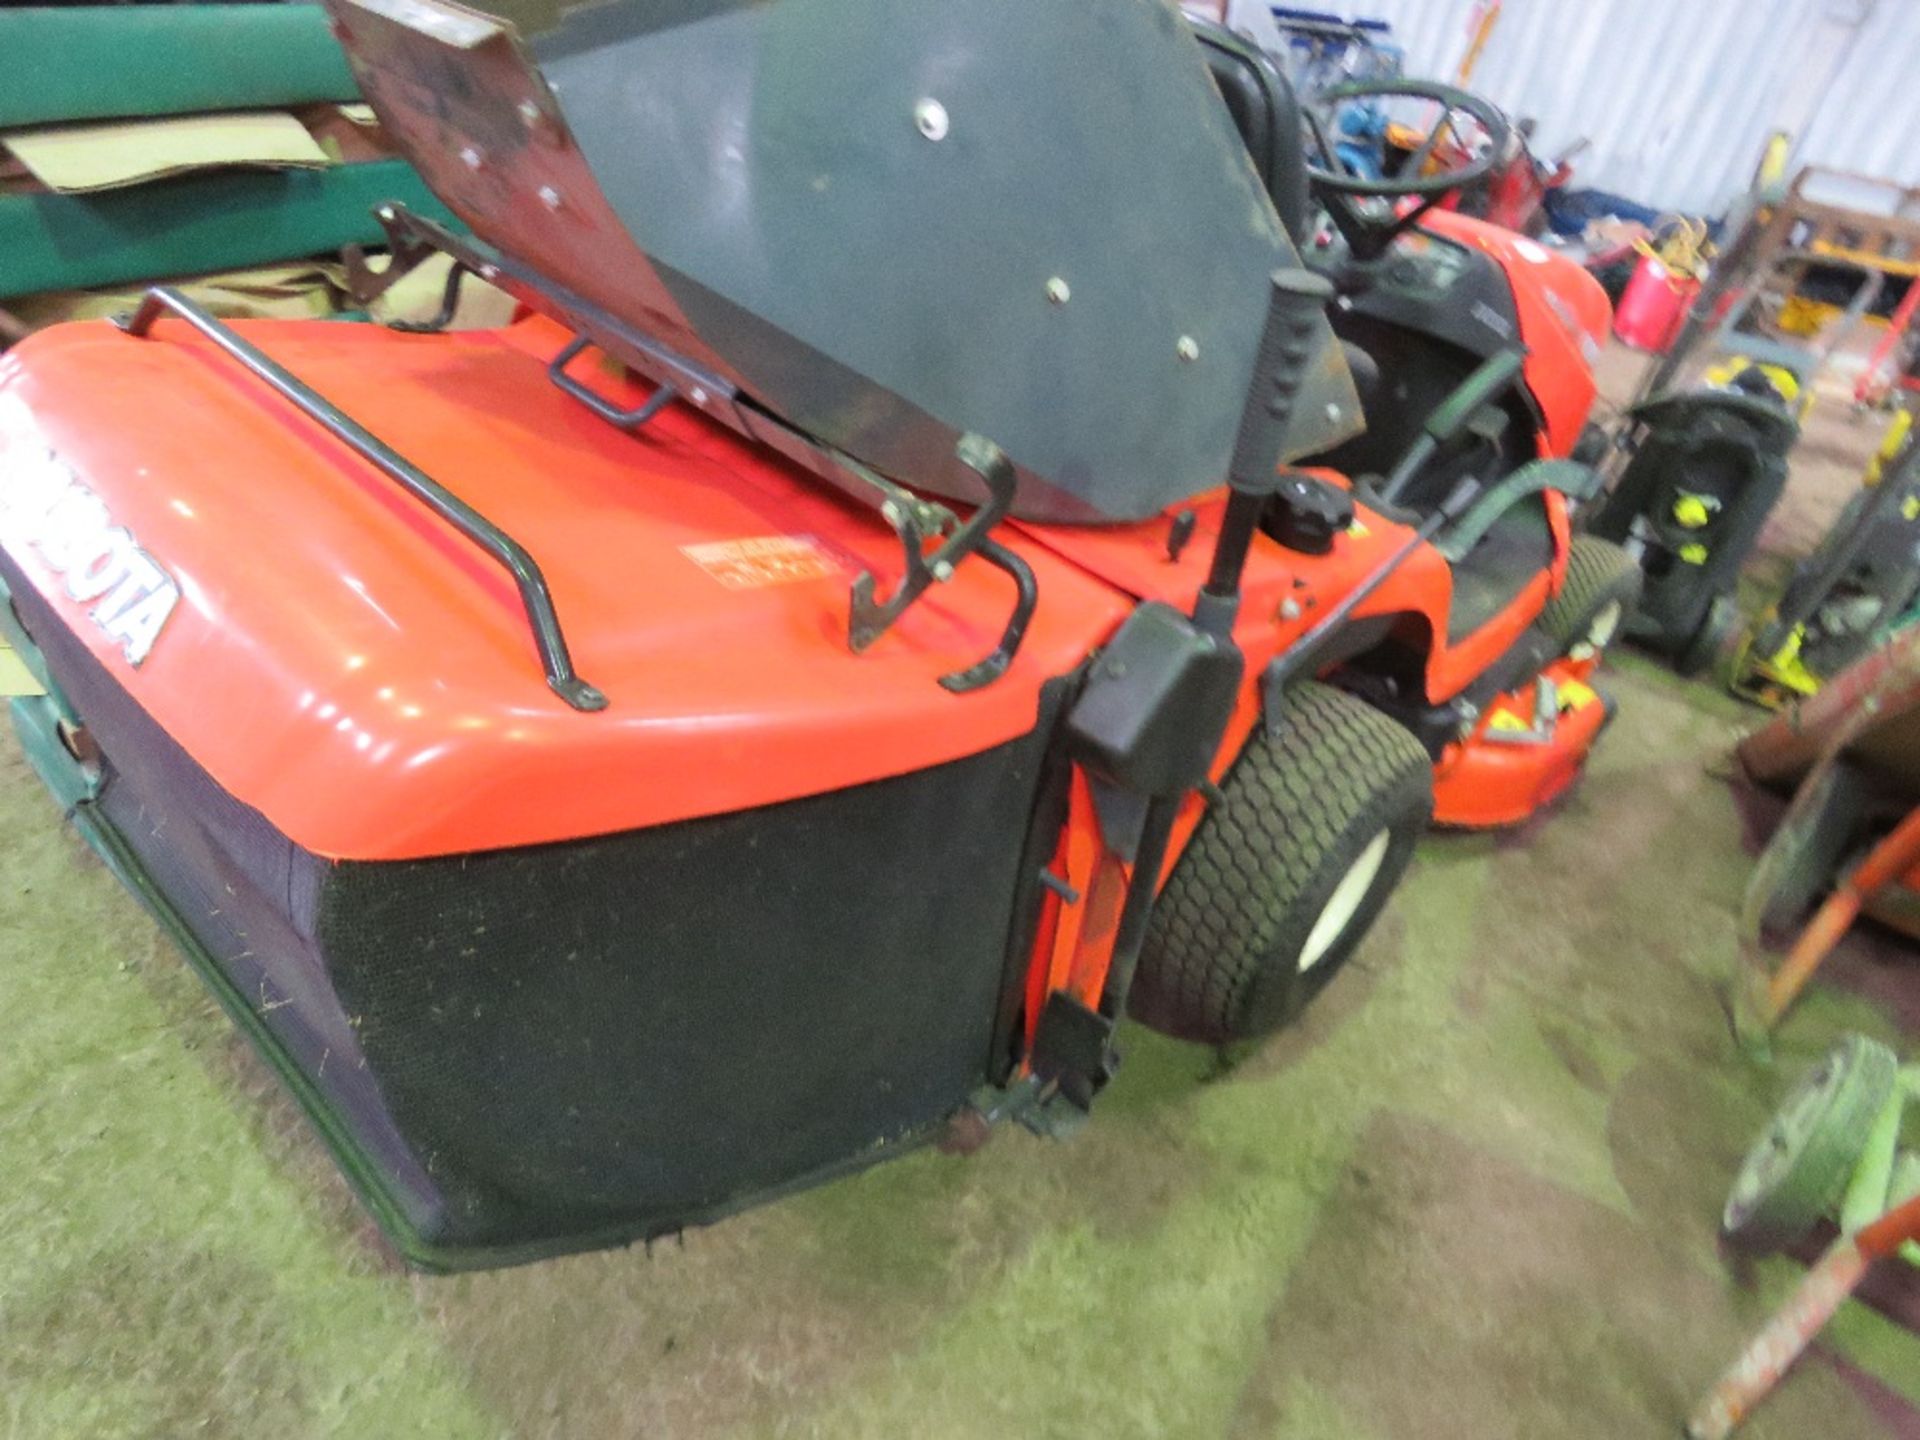 KUBOTA GR1600-II DIESEL RIDE ON MOWER WITH REAR COLLECTOR PLUS DISCHARGE CHUTE. SN:30142. WHEN TESTE - Image 7 of 9